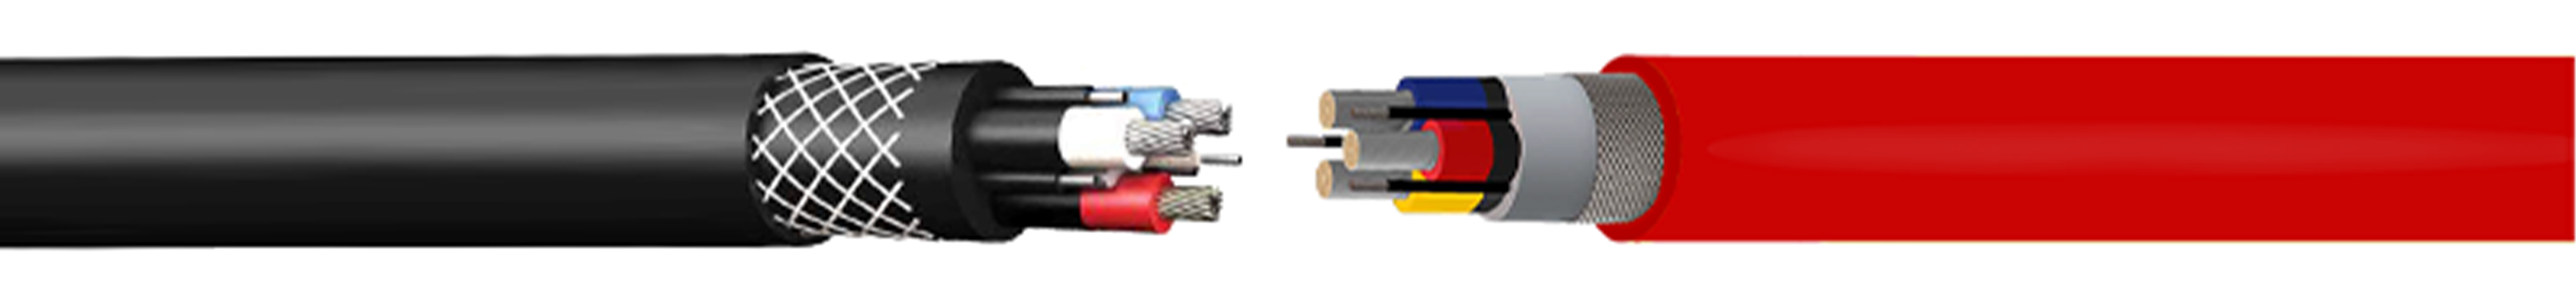 TYPE-241-SUPERFLEX-MINING-CABLES-AS-NZS-1802